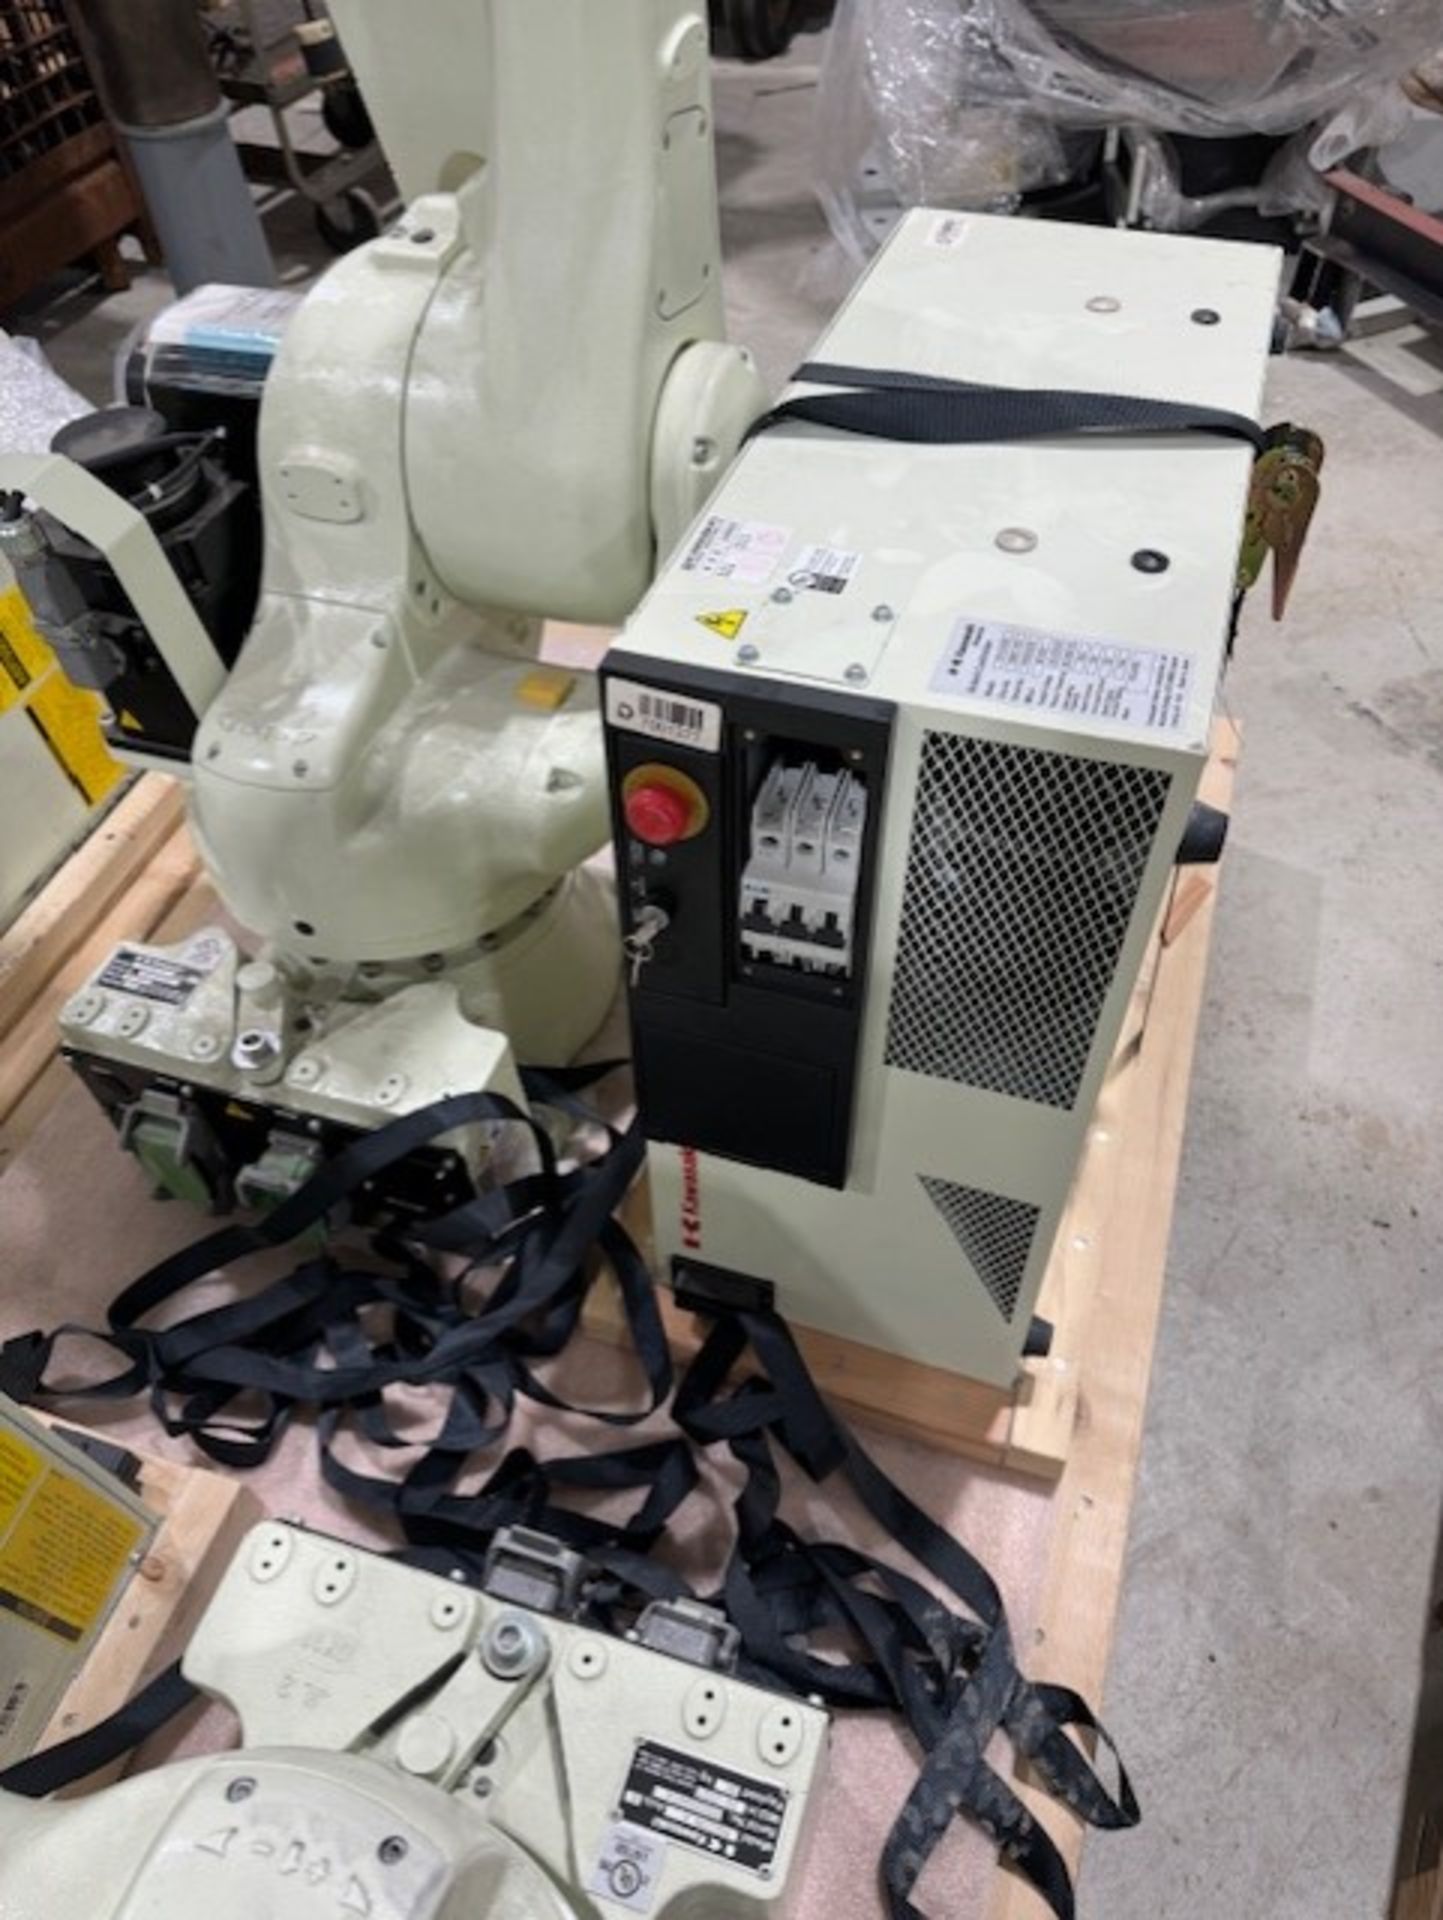 LIGHTLY USED KAWASAKI ROBOT RS020N, SN 4158, 20KG X 1725MM REACH WITH EO1 CONTROLS, CABLES & TEACH - Image 4 of 7